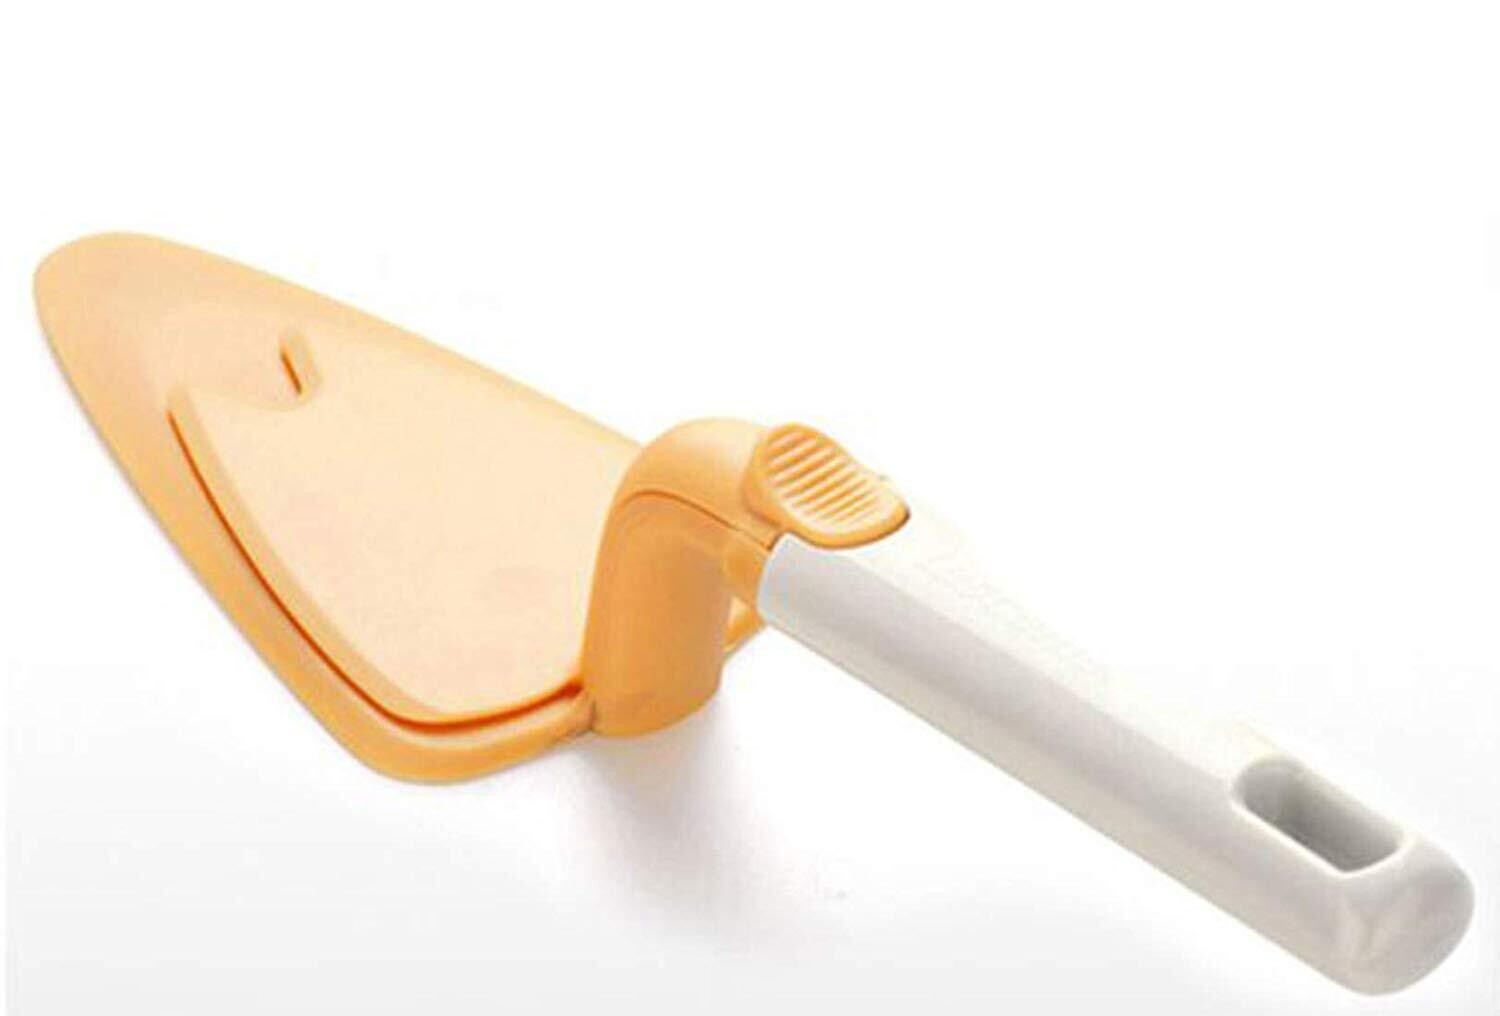 Cake Lifter, Pizza Lifter, Pastry Lifter, Cake Serving Spoon with Slide able Function Plastic